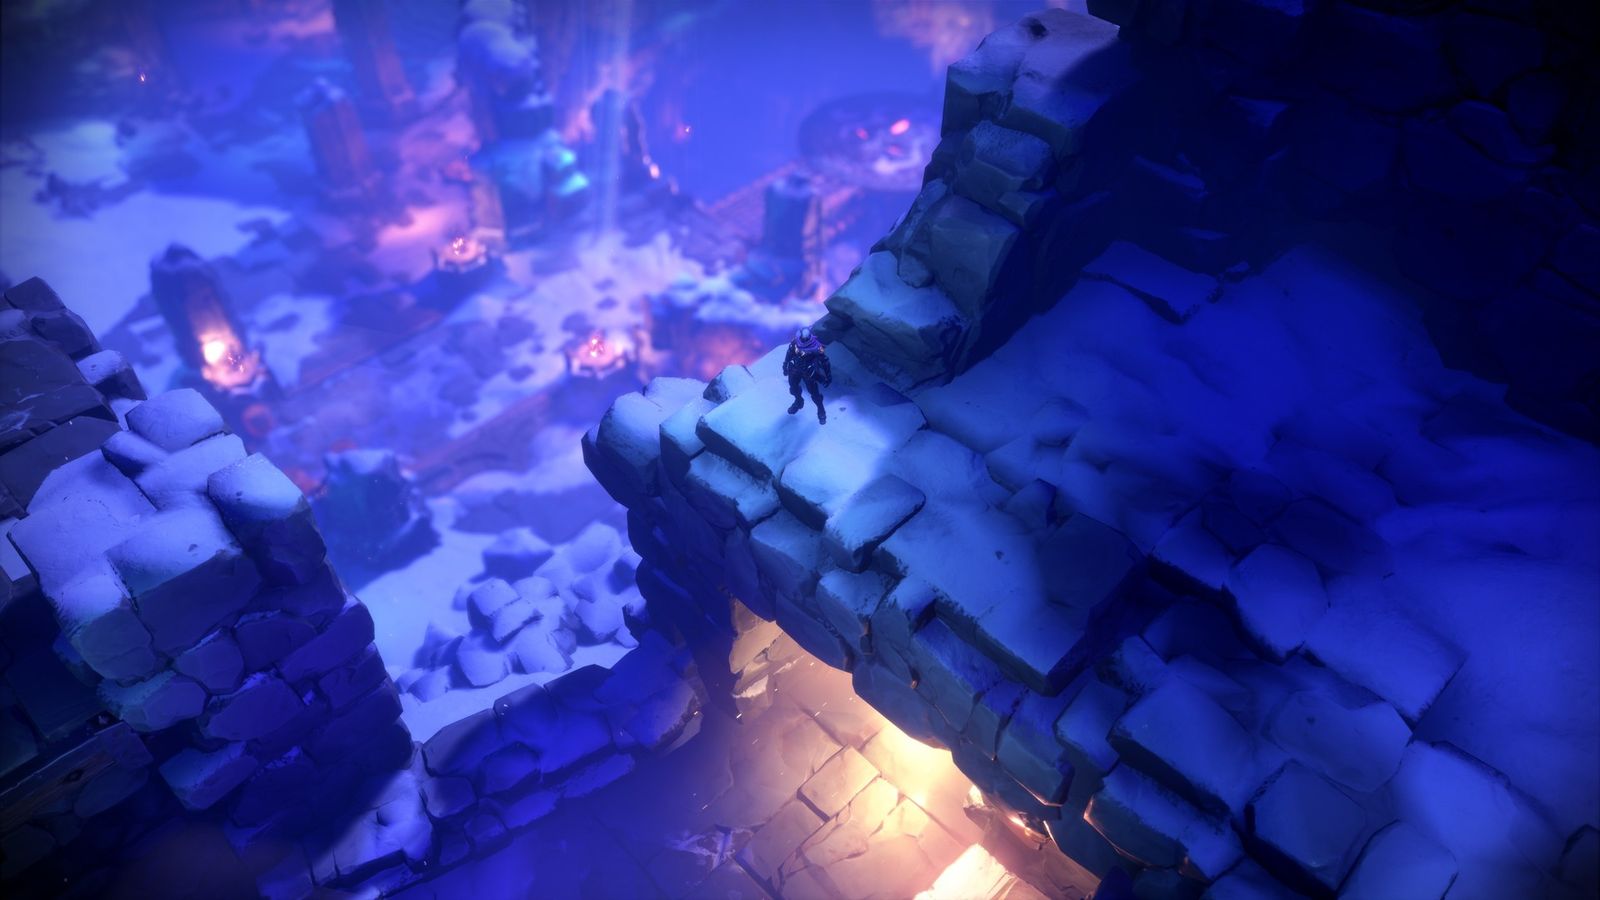 Top-down in-game image from Darksiders Genesis of a character standing on the edge of a rocky building.